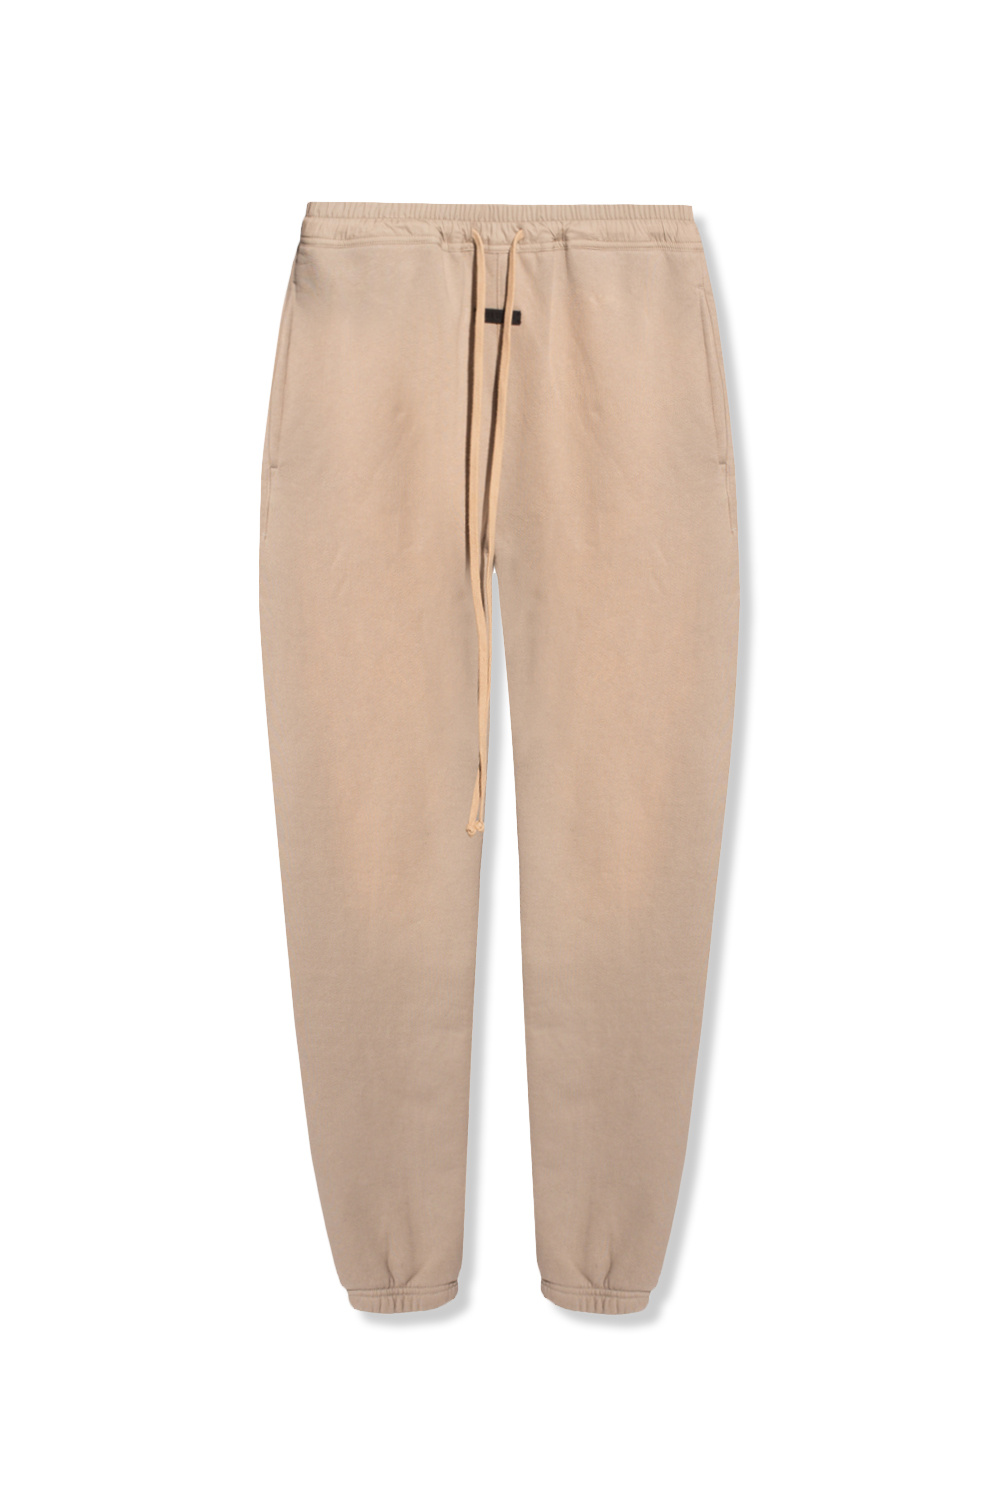 jacquemus alba fitted knitted leggings item Sweatpants with logo